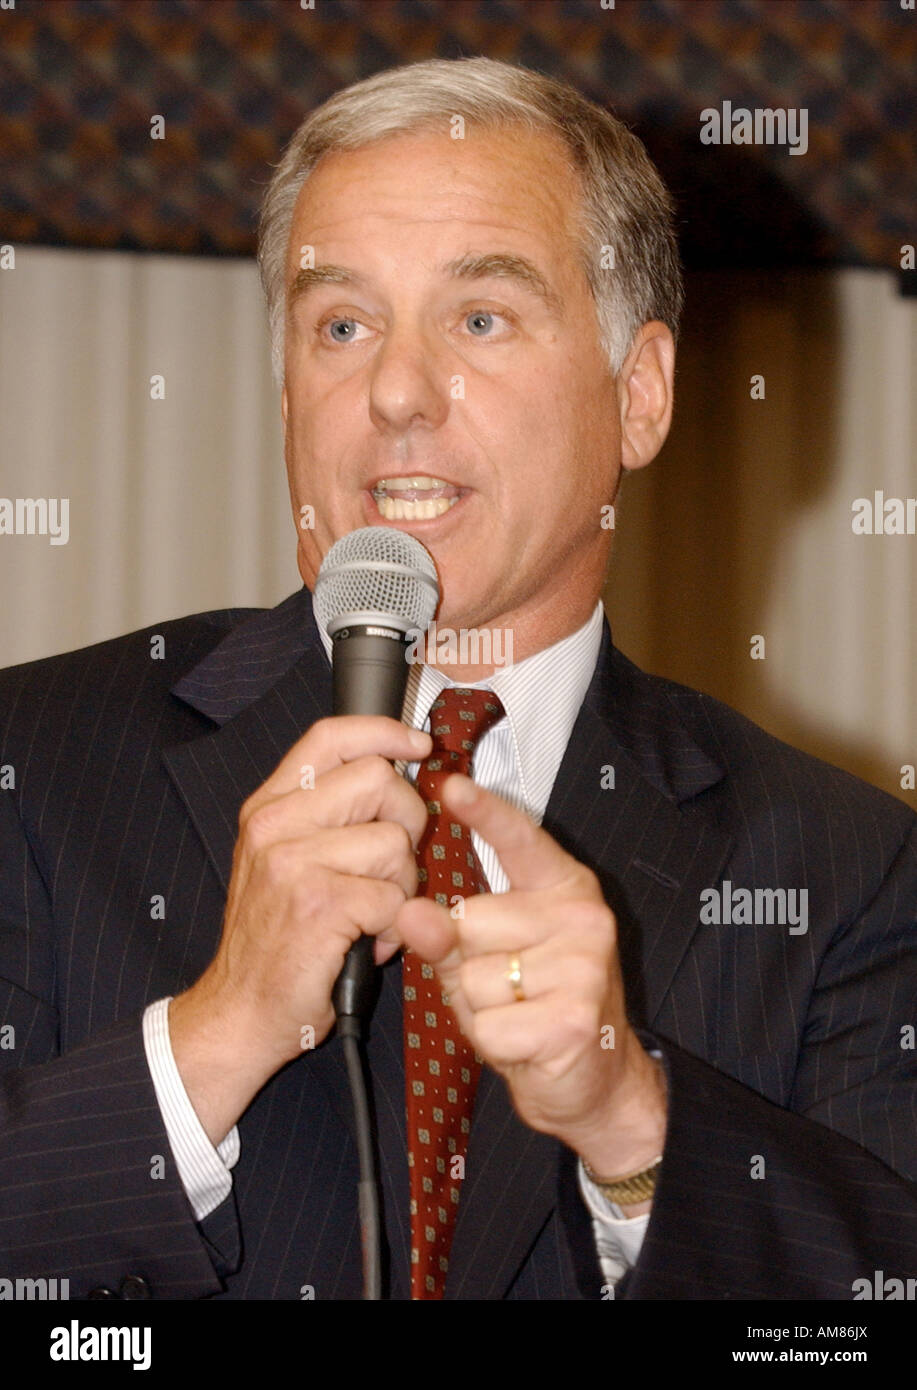 Former Governor Howard Dean D VT speaks during the Presedential Candidates Forum in Arlington VA on friday July 11 2003 This is Stock Photo